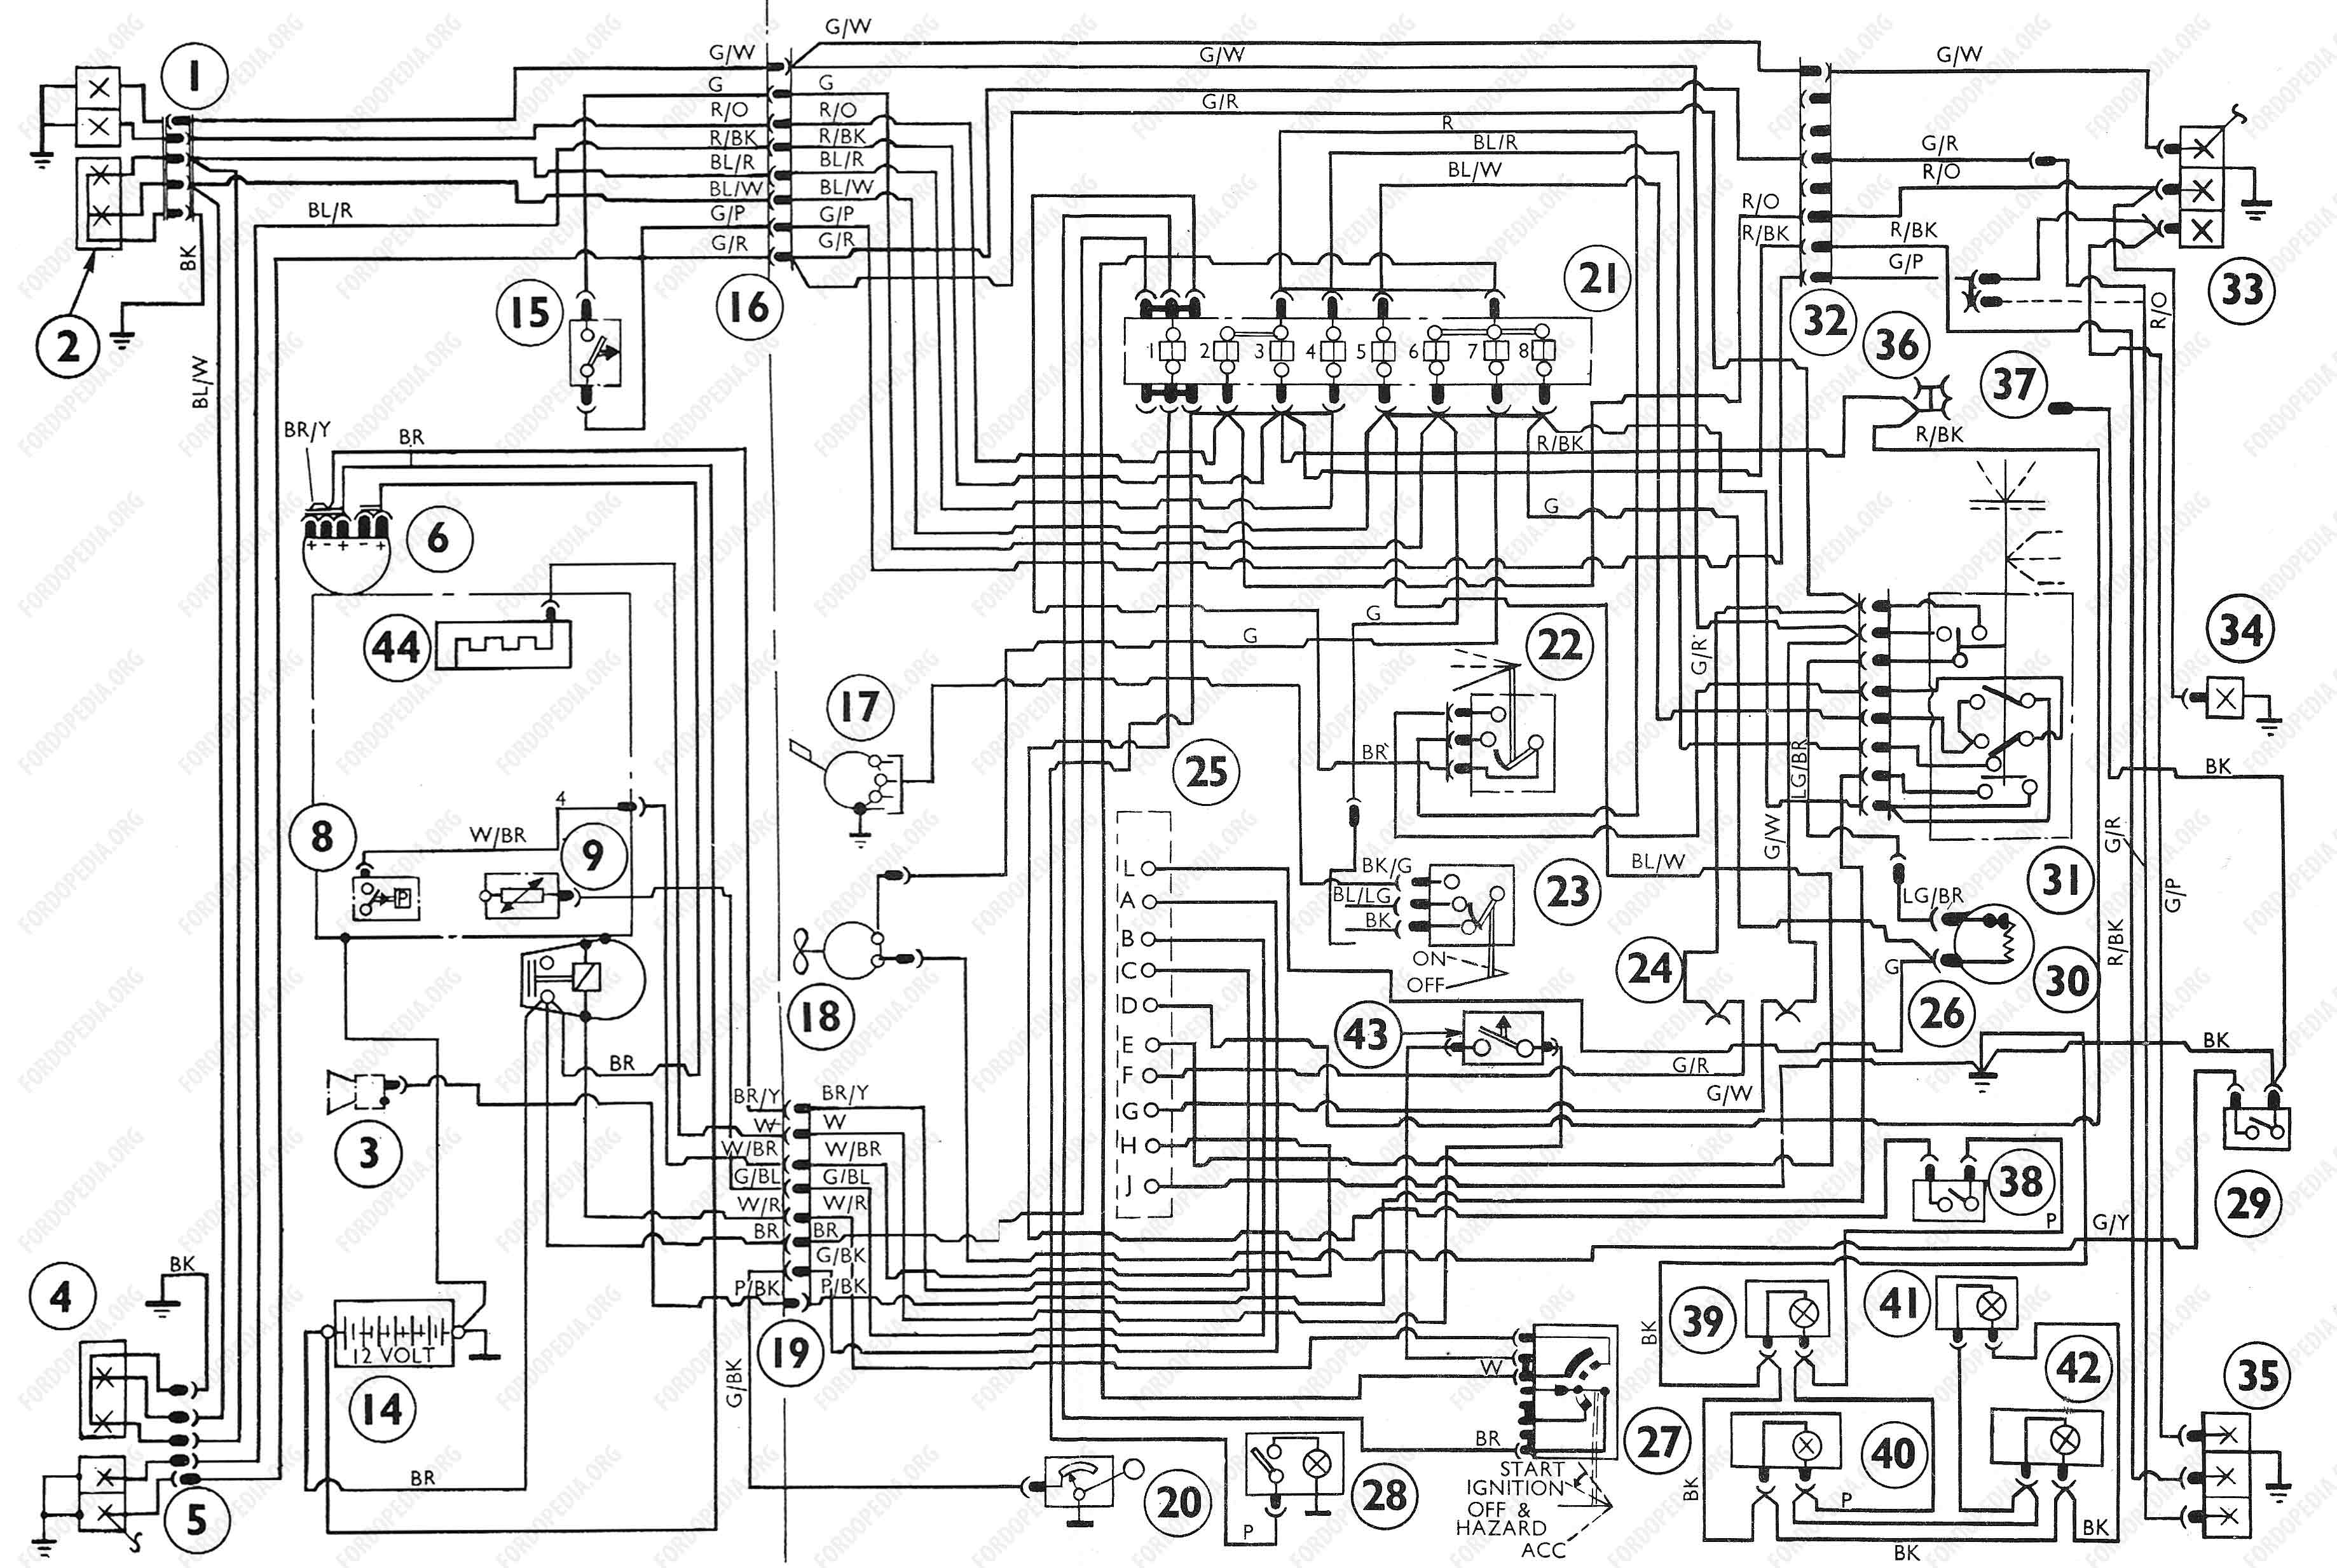 Wiring Diagram For A Ford from www.fordopedia.org